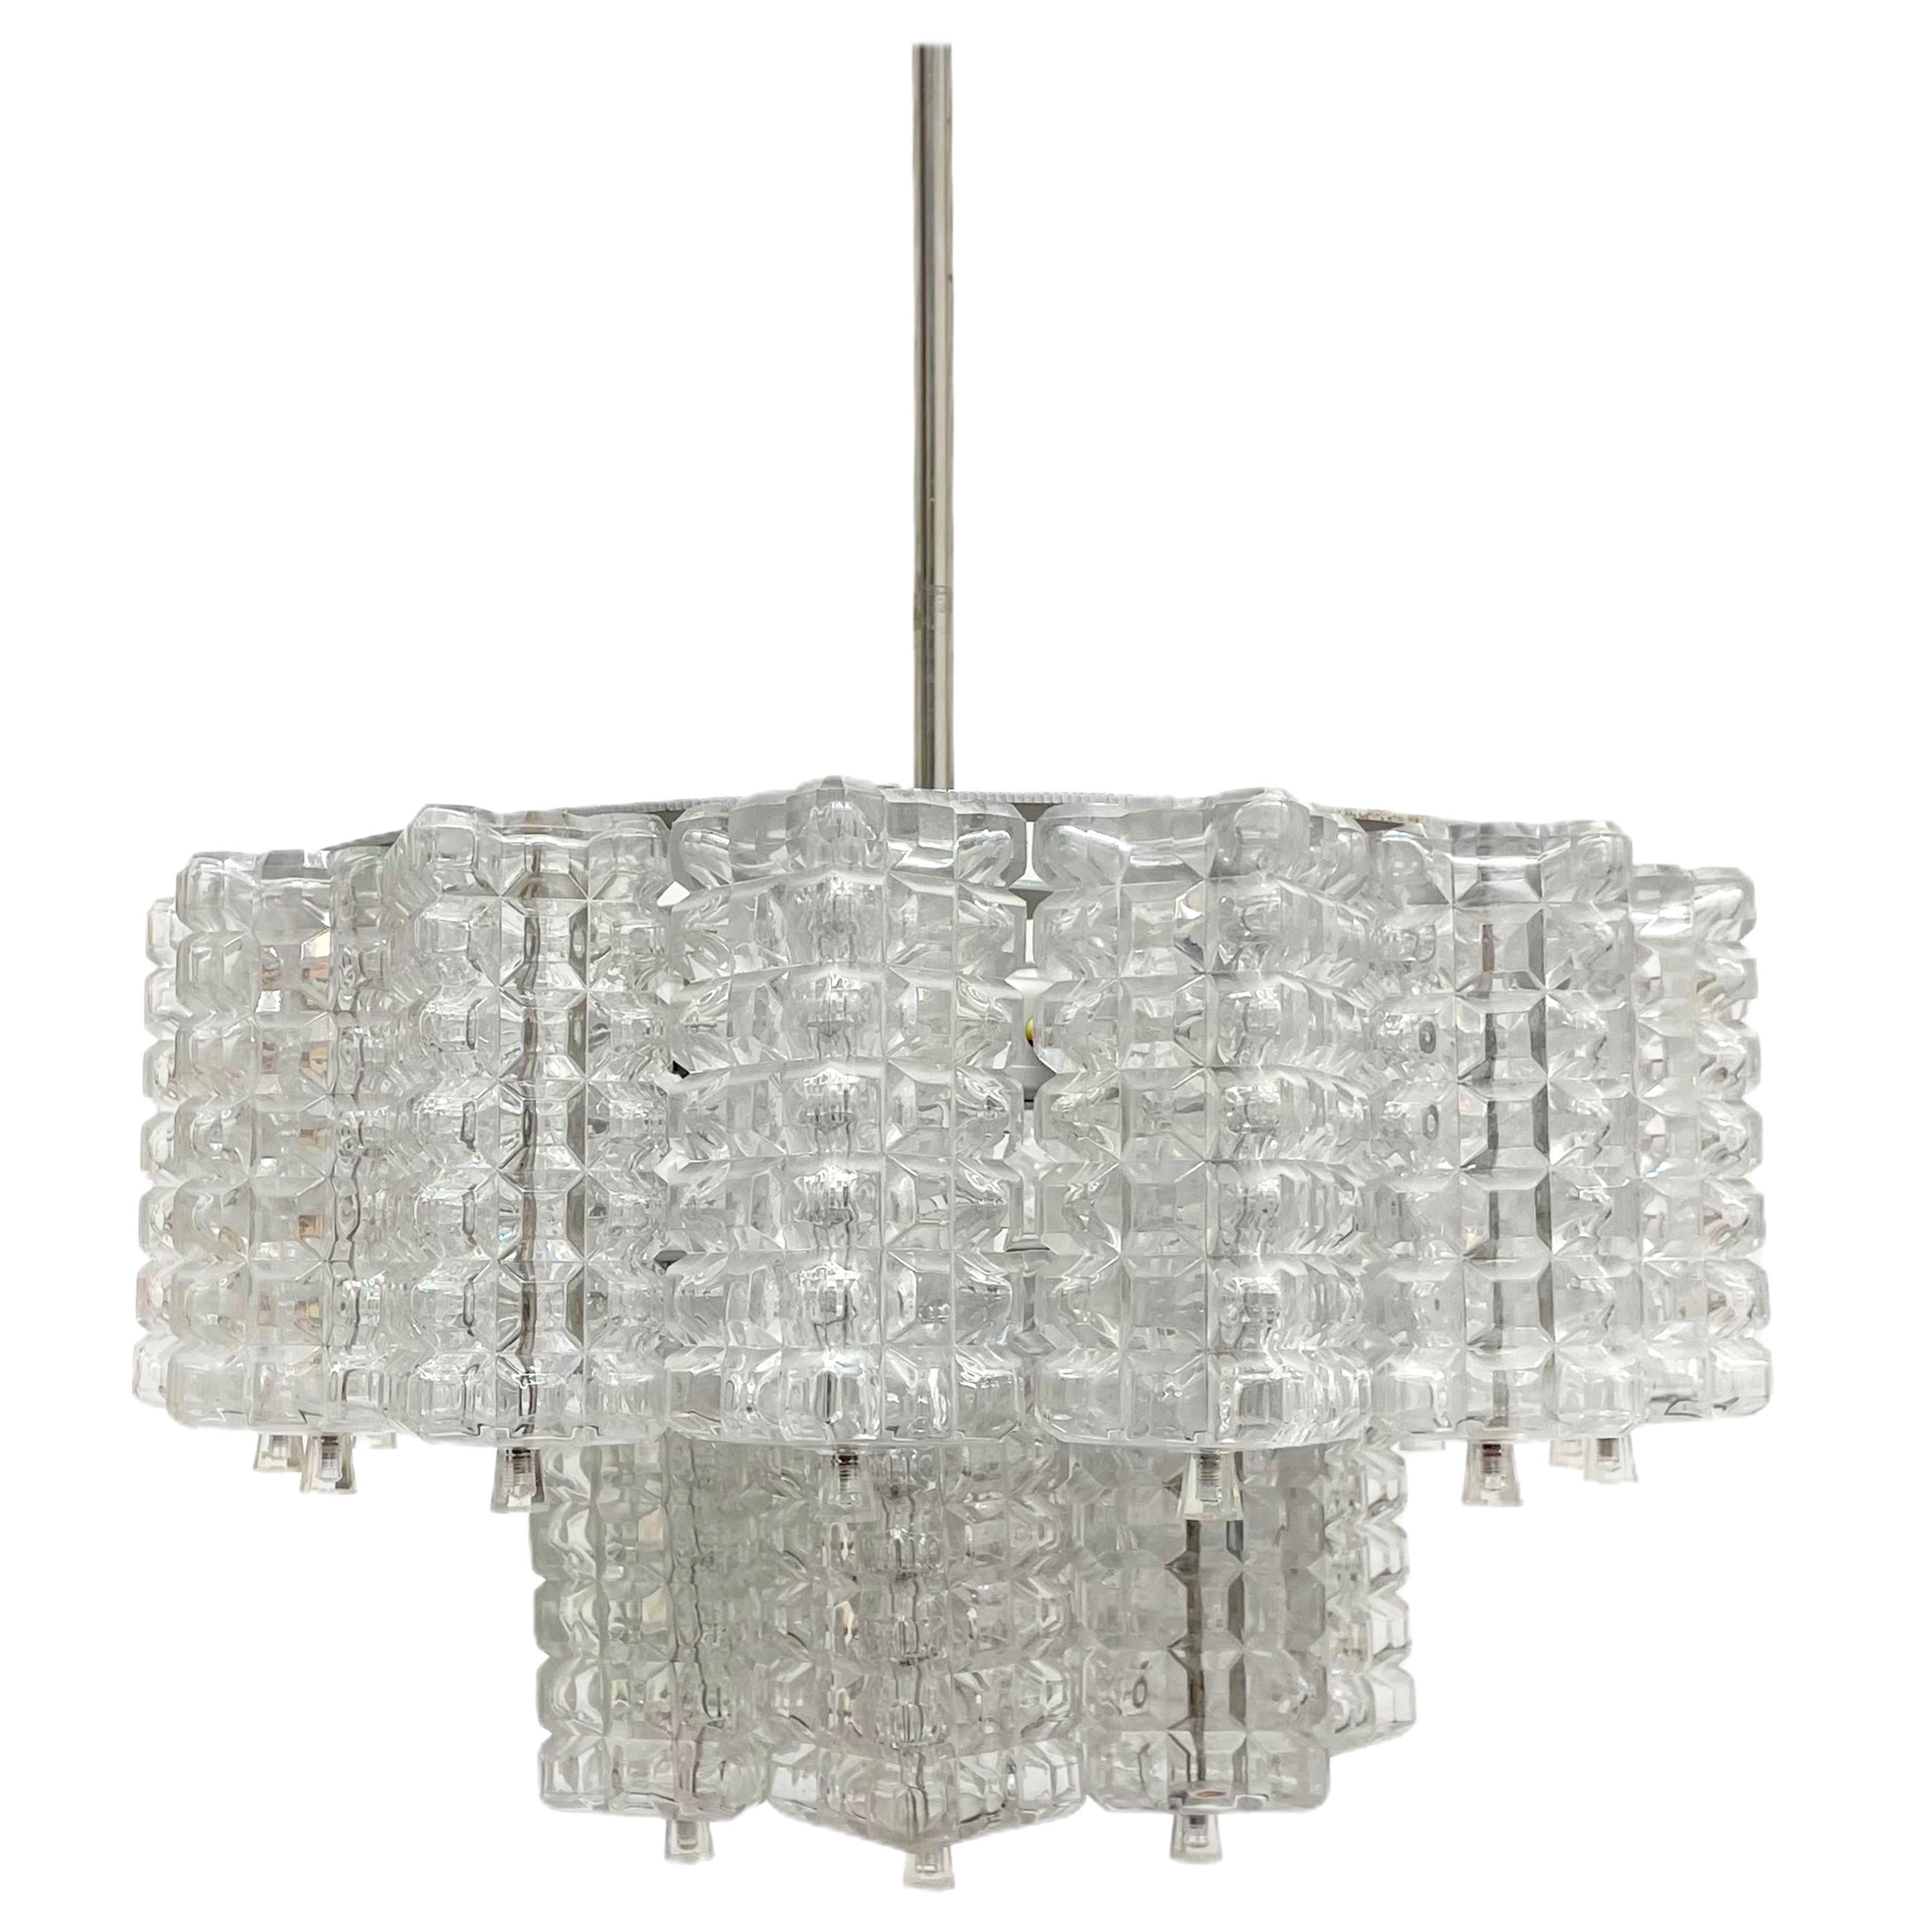 Two Tiered Glass Cube Chandelier by Austrolux, Austria, 1960s For Sale